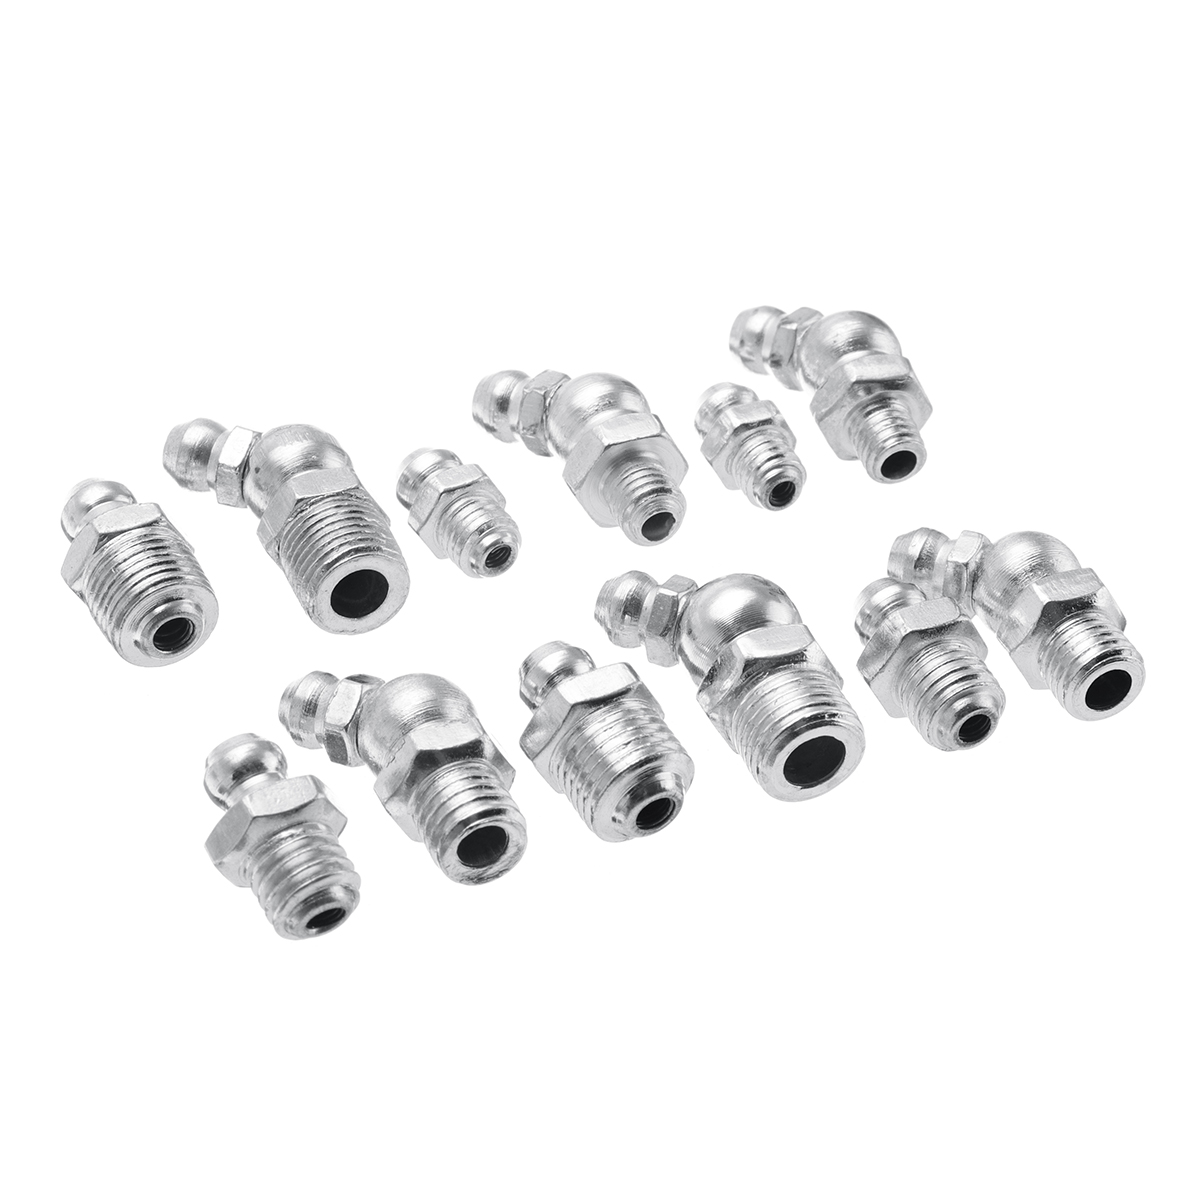 130pcs-Metric-Imperial-Fitting-BSP-UNF-M6-M8-M10-Assorted-Hydraulic-Grease-Nipples-Pipes-Fittings-1436097-7